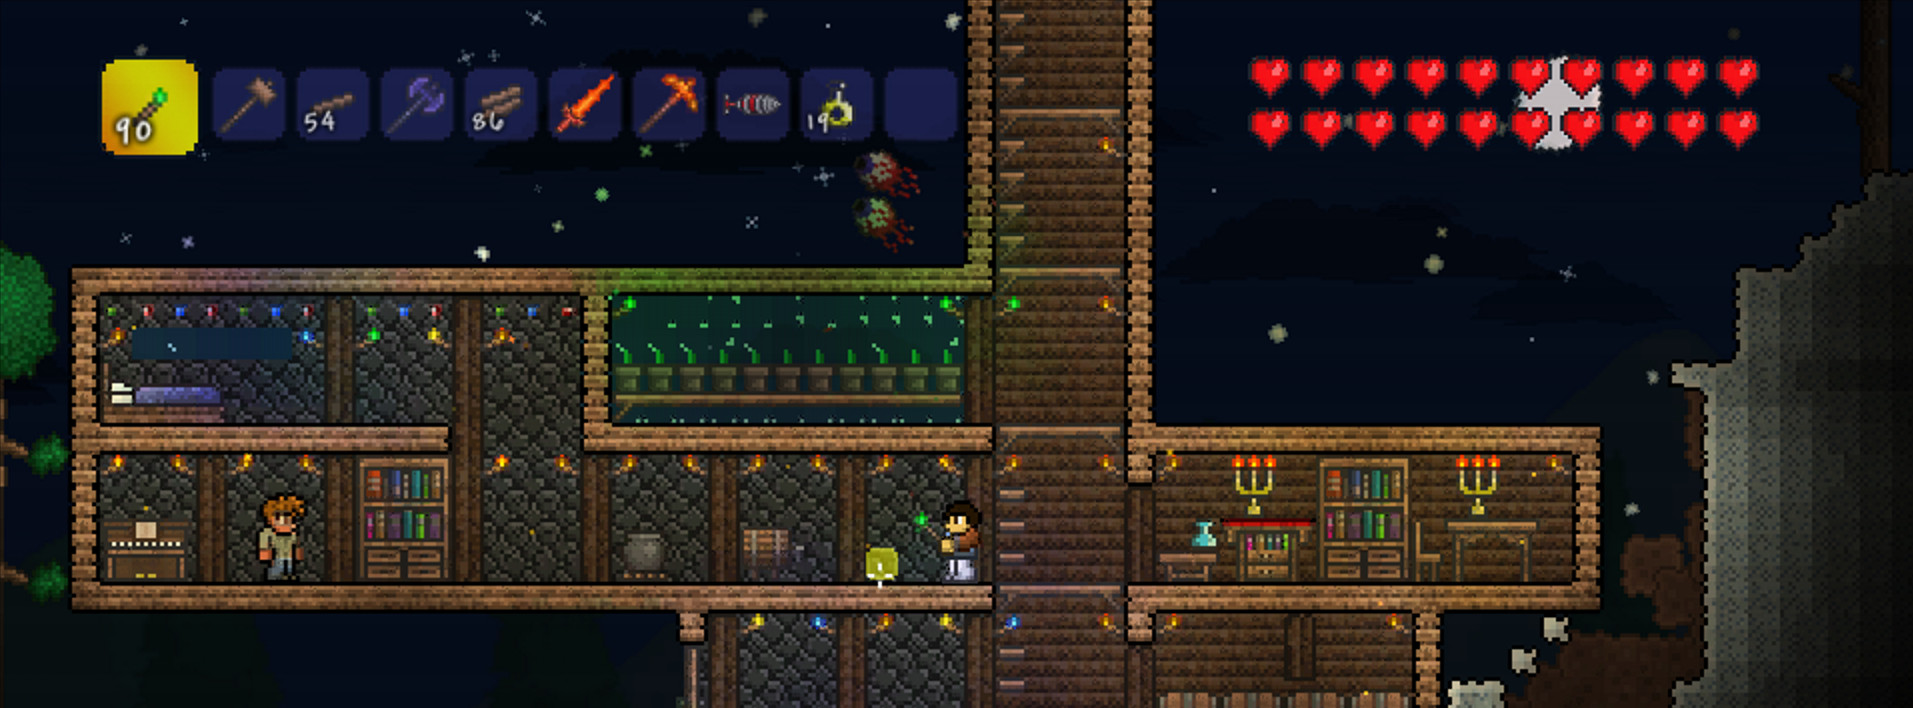 how to play terraria multiplayer for free on pc